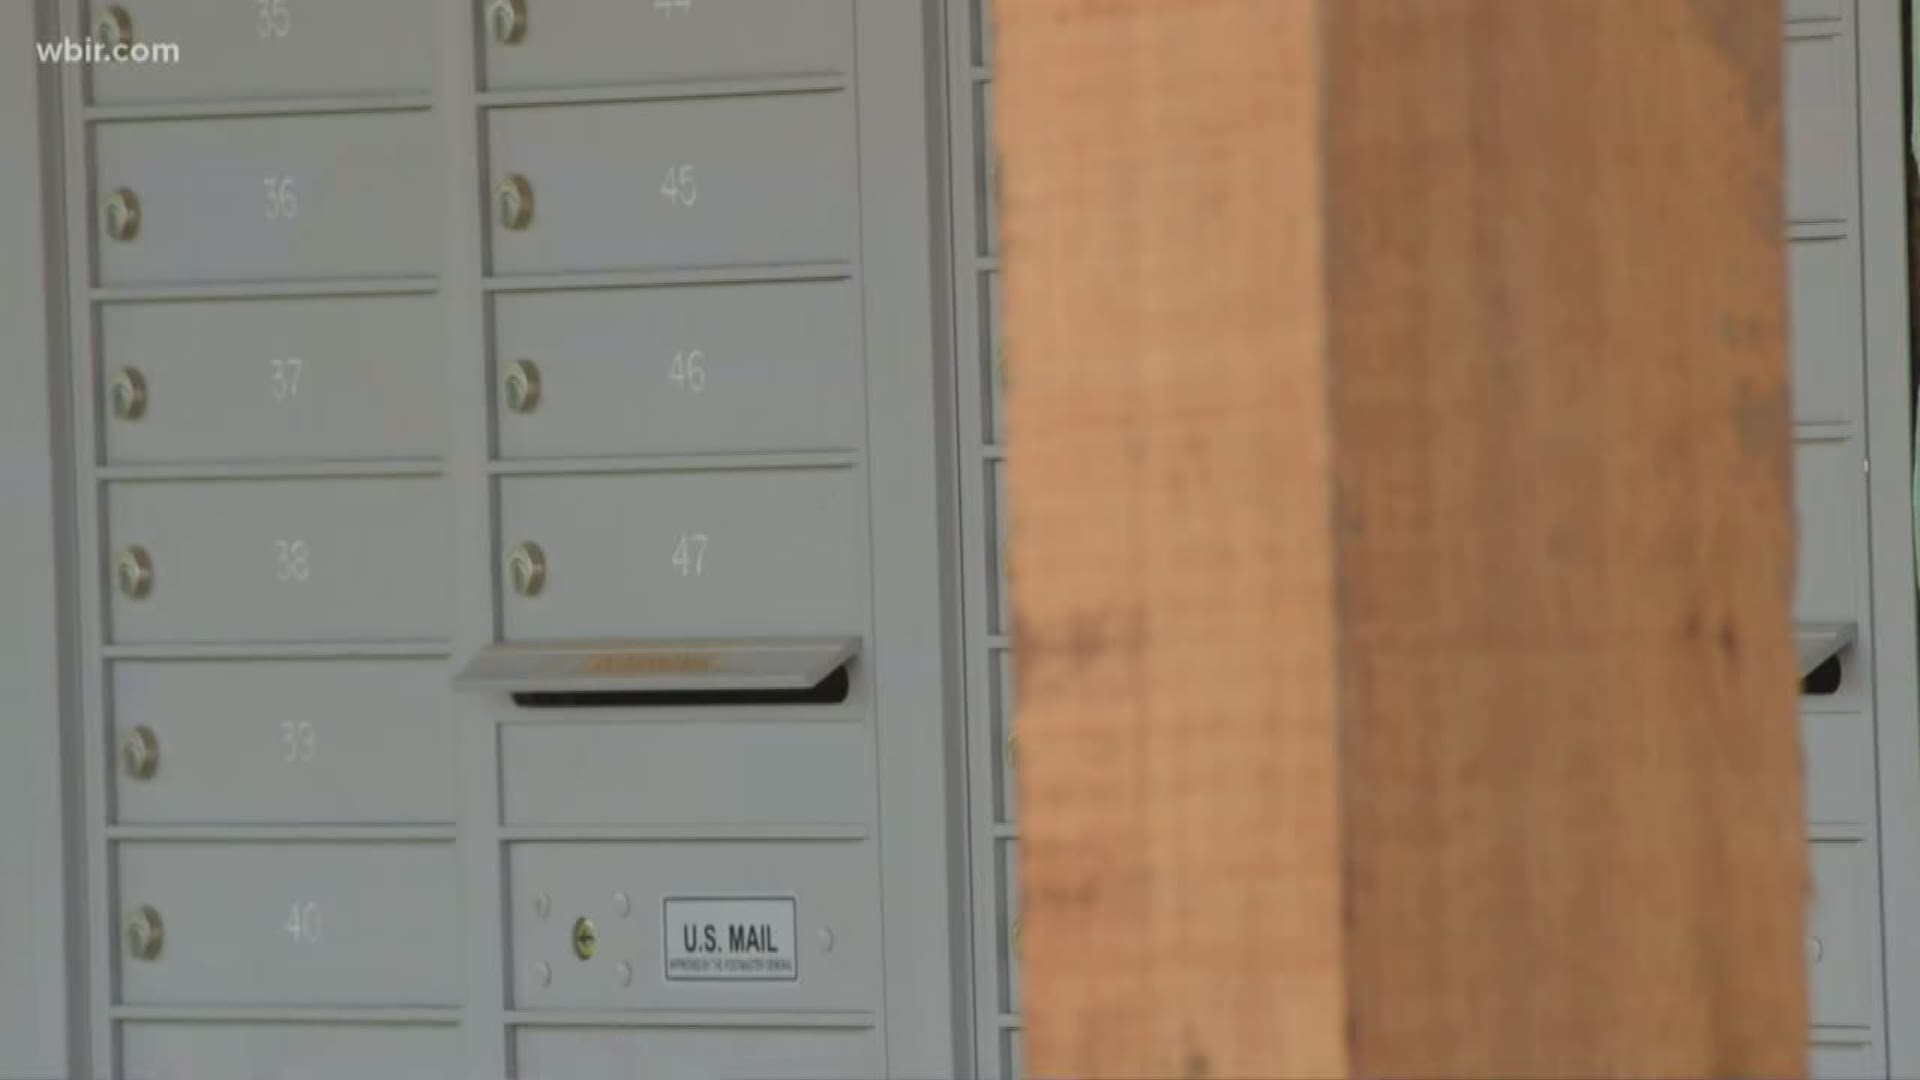 Knoxville City Council is asking the U.S. Postal Service not to require new developments to put up cluster mailboxes.